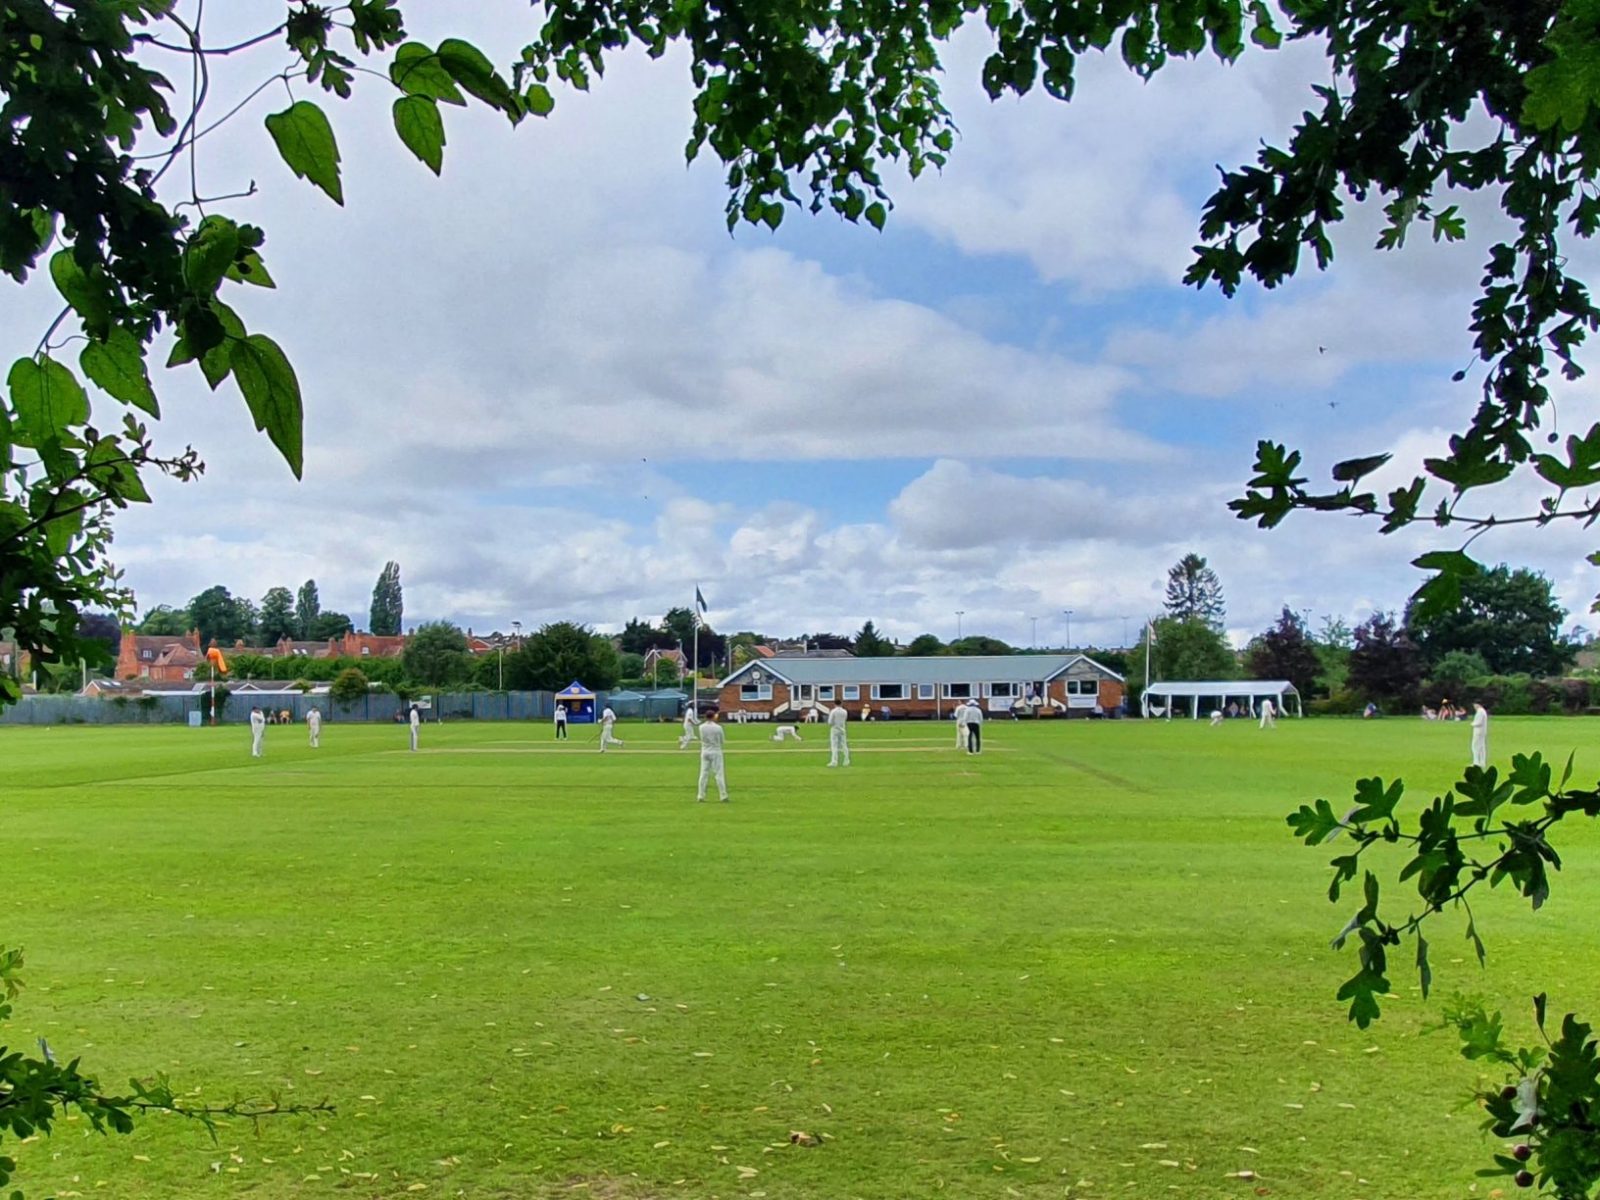 Bridgnorth Cricket Club will host Shropshire’s NCCA Championship match against Wales between August 11-13